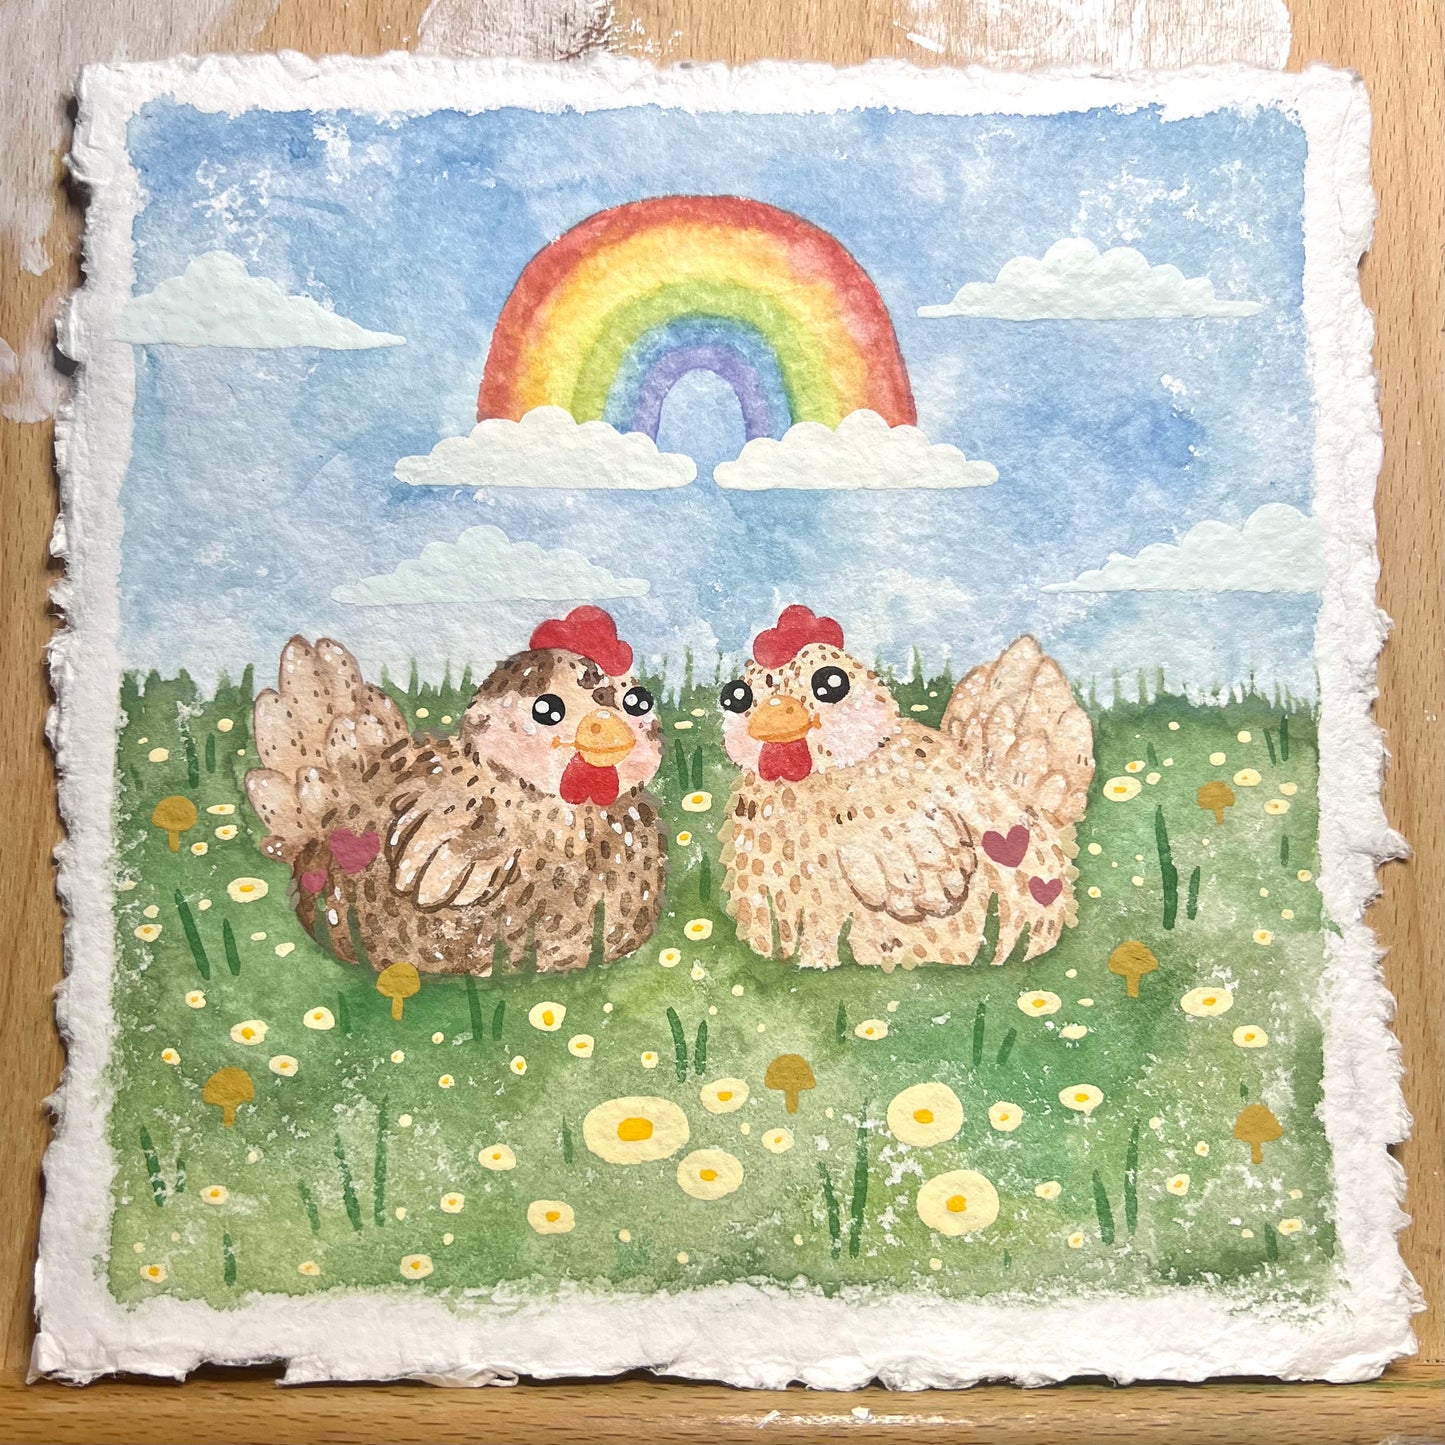 Chickens in Love Painting